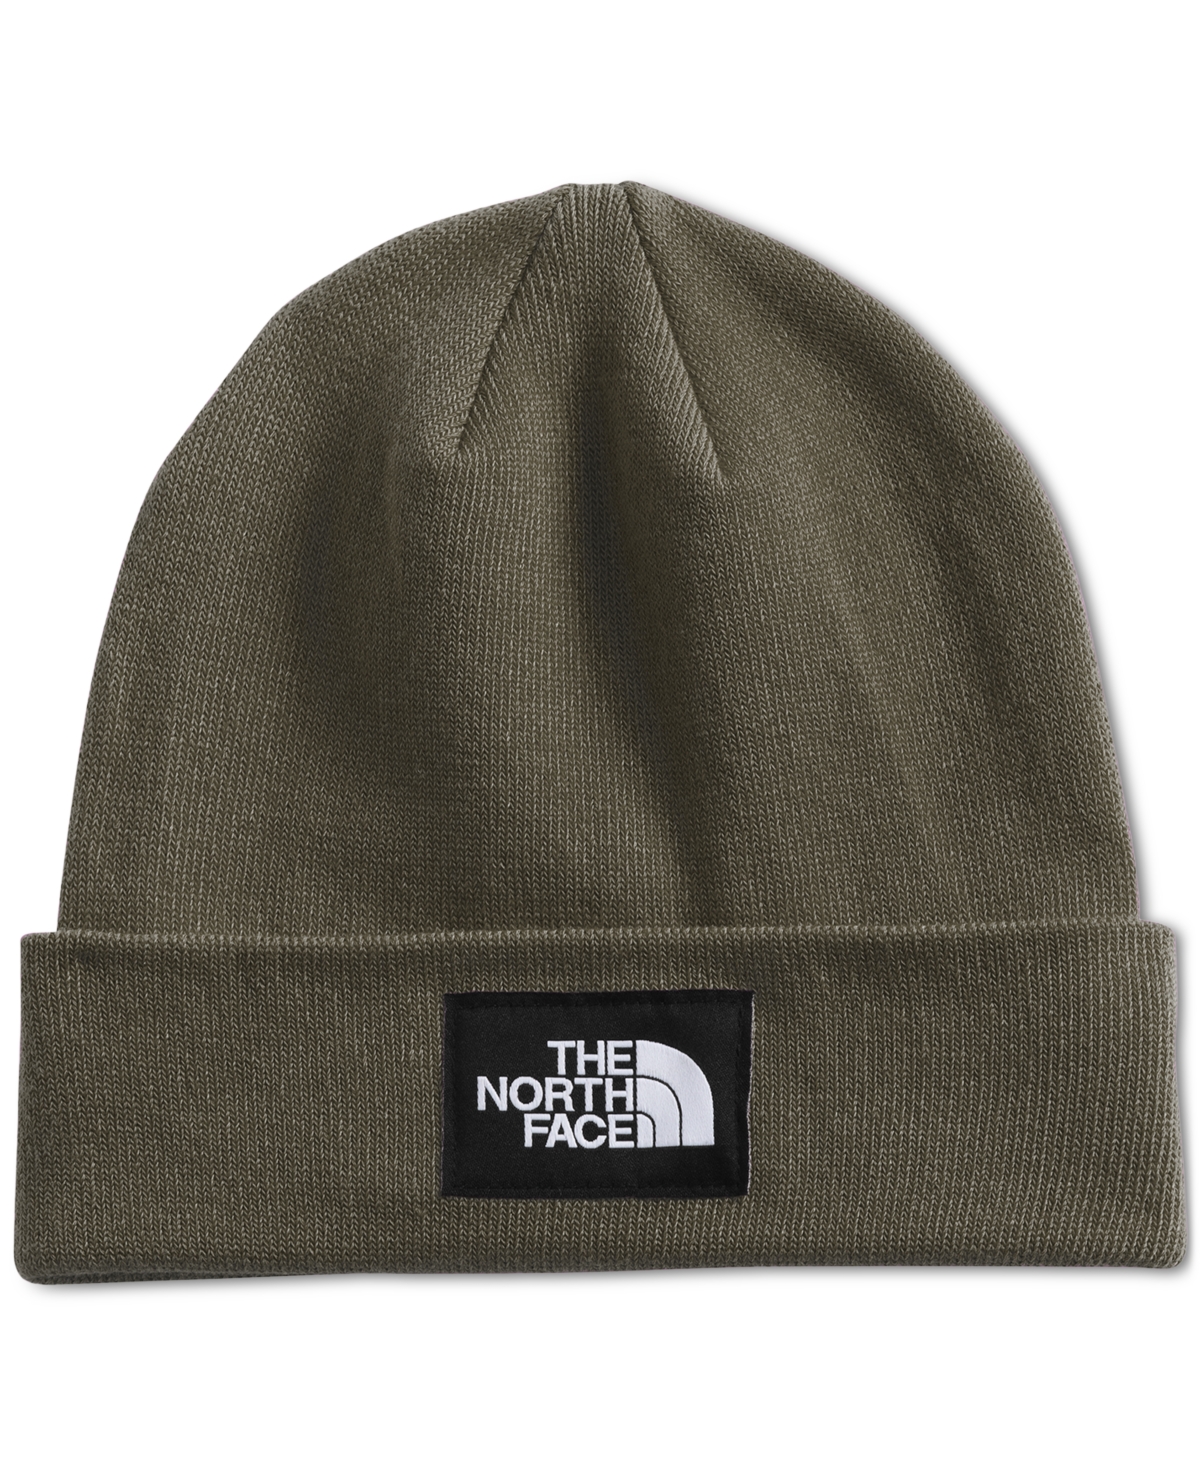 The North Face Men's Dock Worker Beanie In New Taupe Green